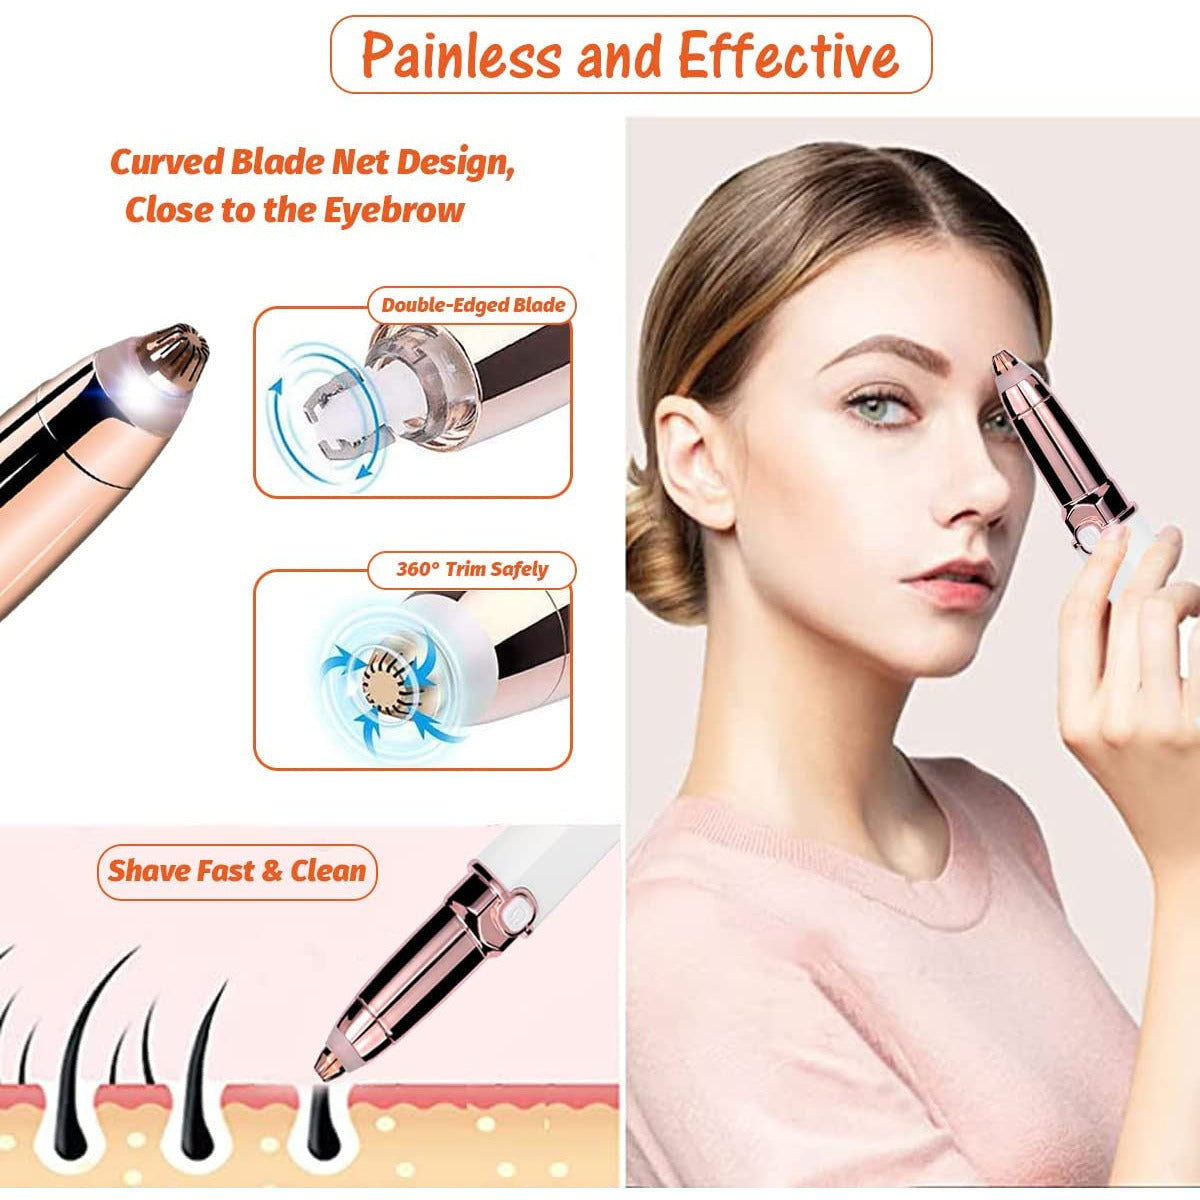 71mini Electric Finishing Woman Lady Facial Hair Lipstick Remover Shaver  Bikini Trimmer Set  China Electric Razor and Facial Hair Removal price   MadeinChinacom